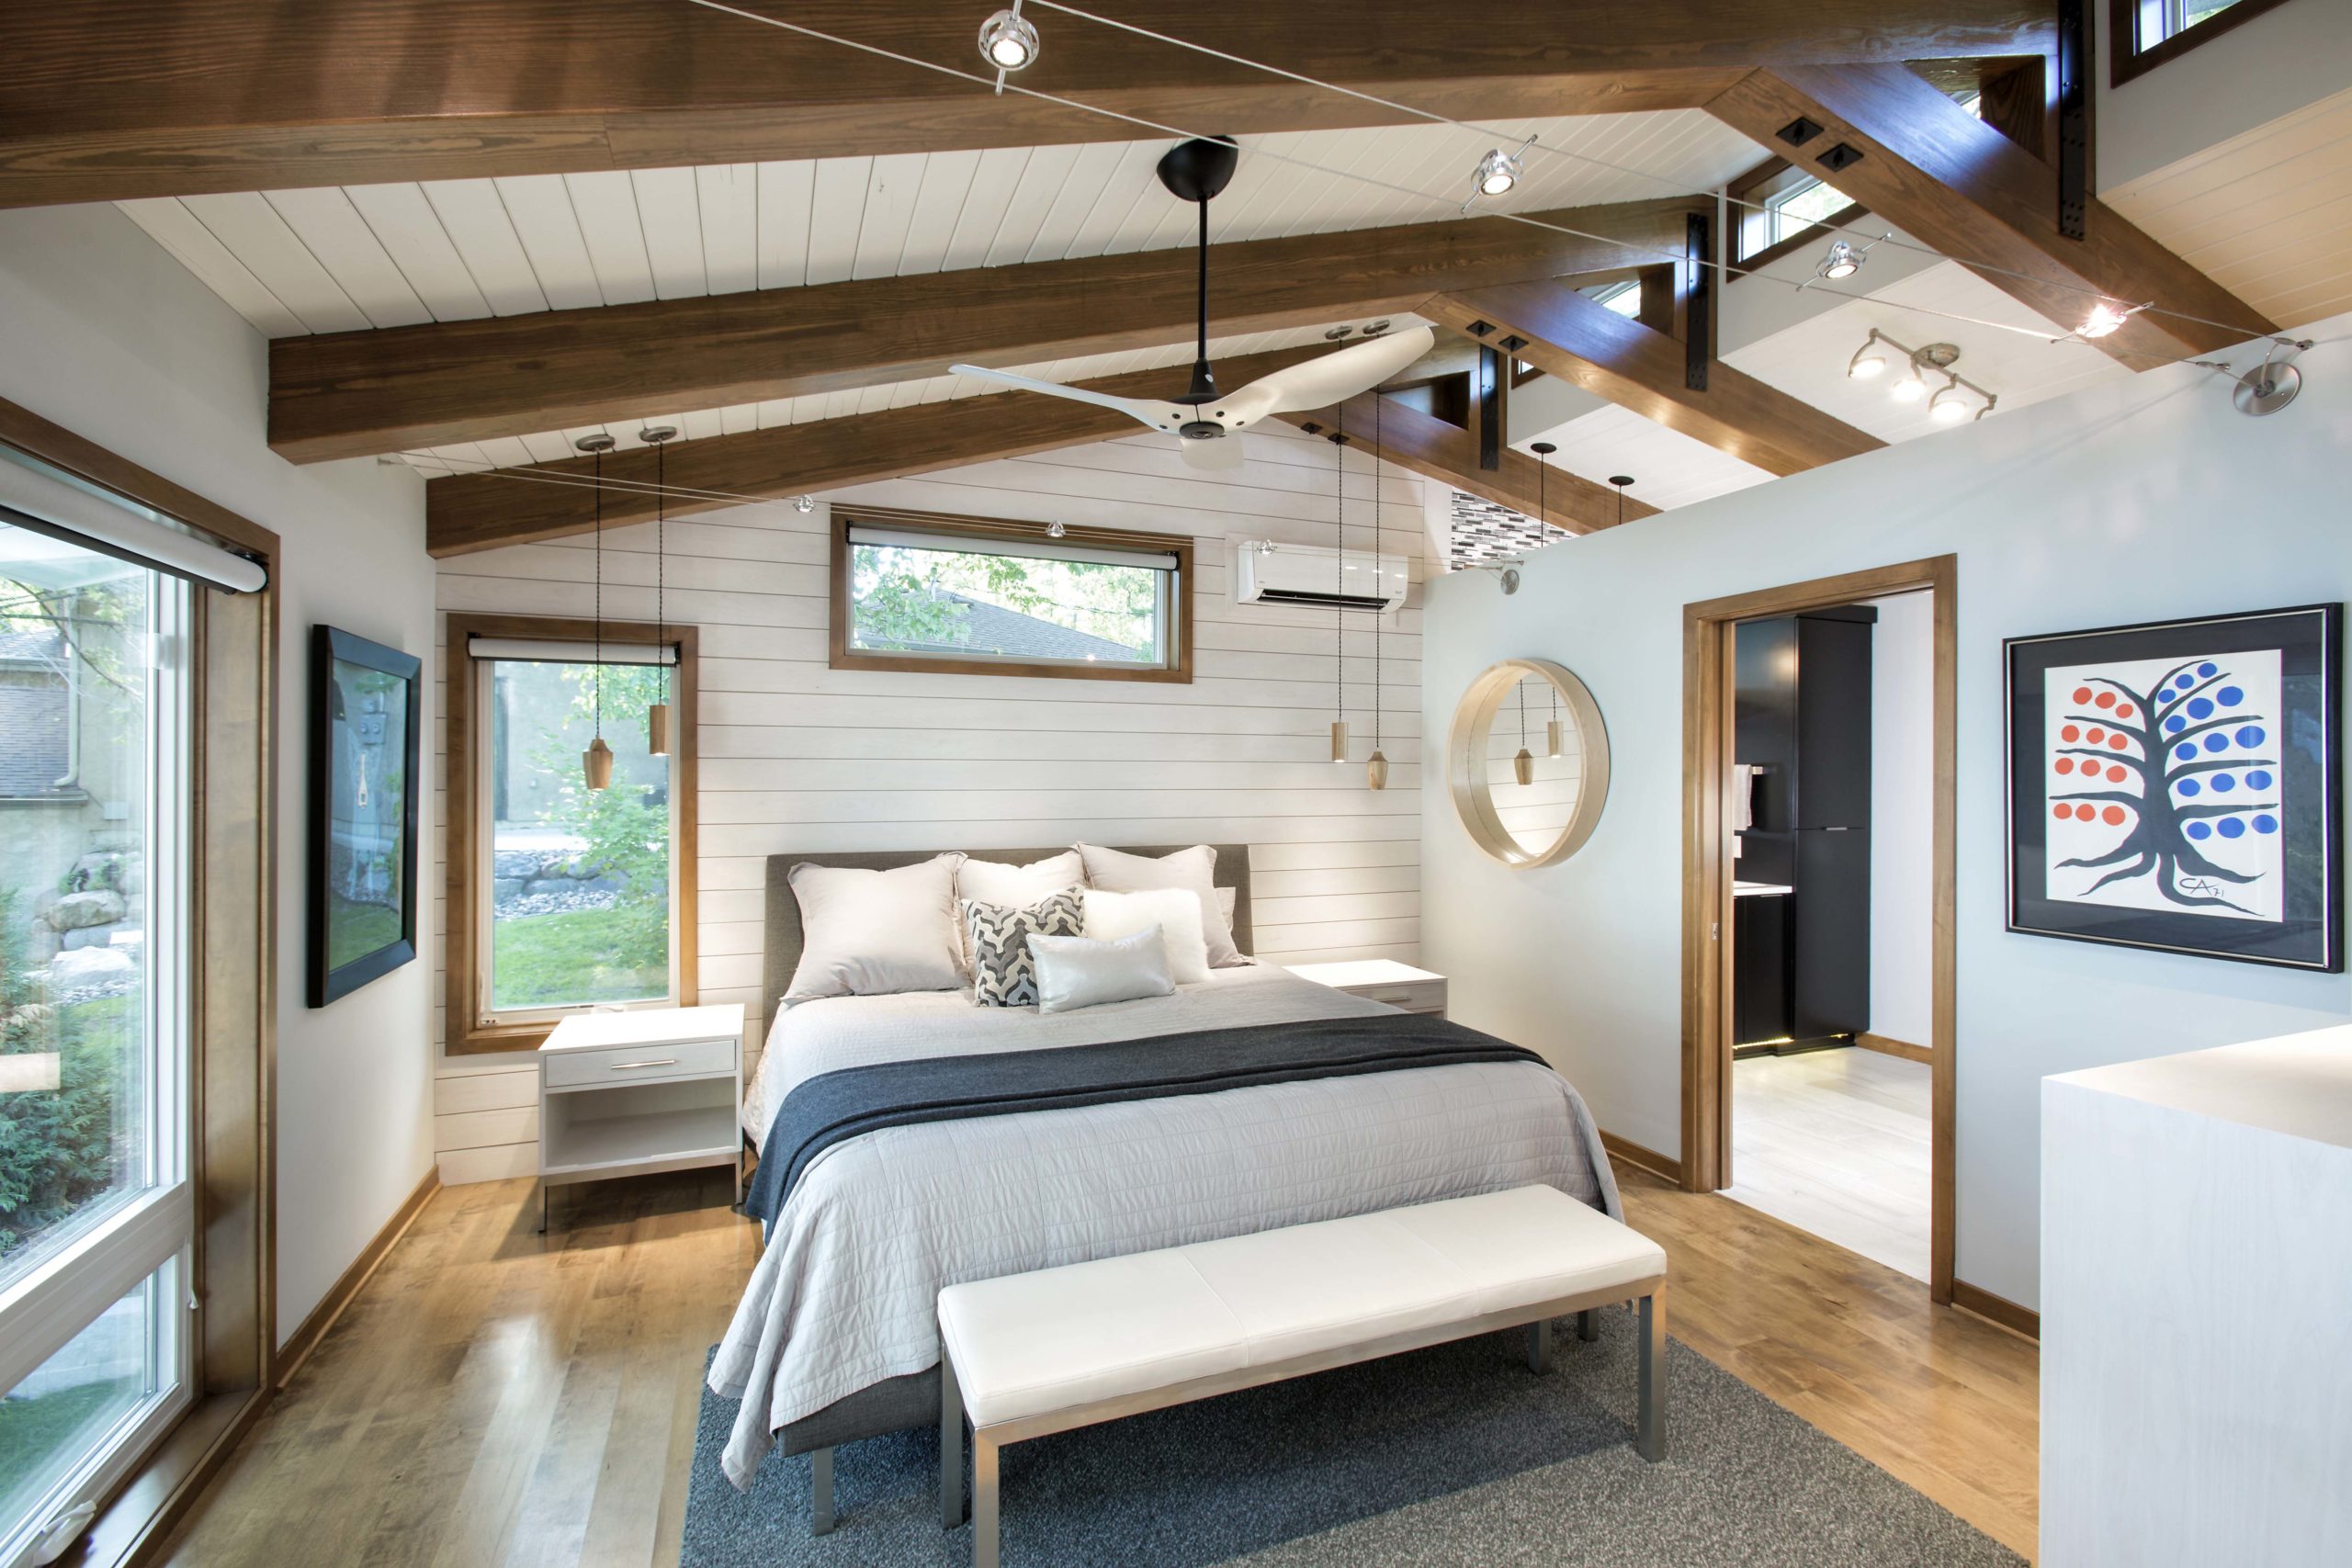 A bedroom with wooden beams and a ceiling fan.